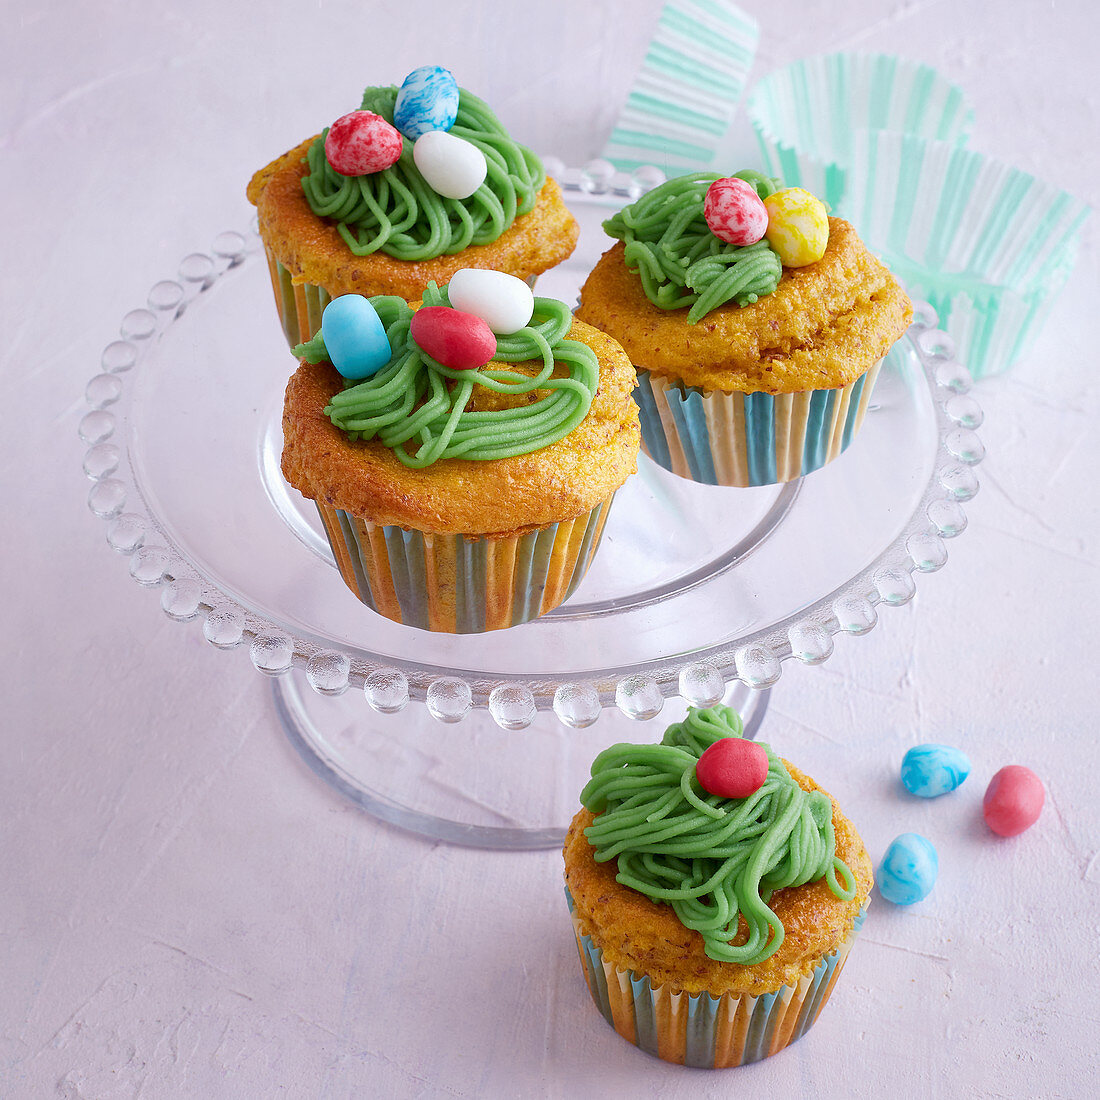 Almond and carrot muffins for Easter